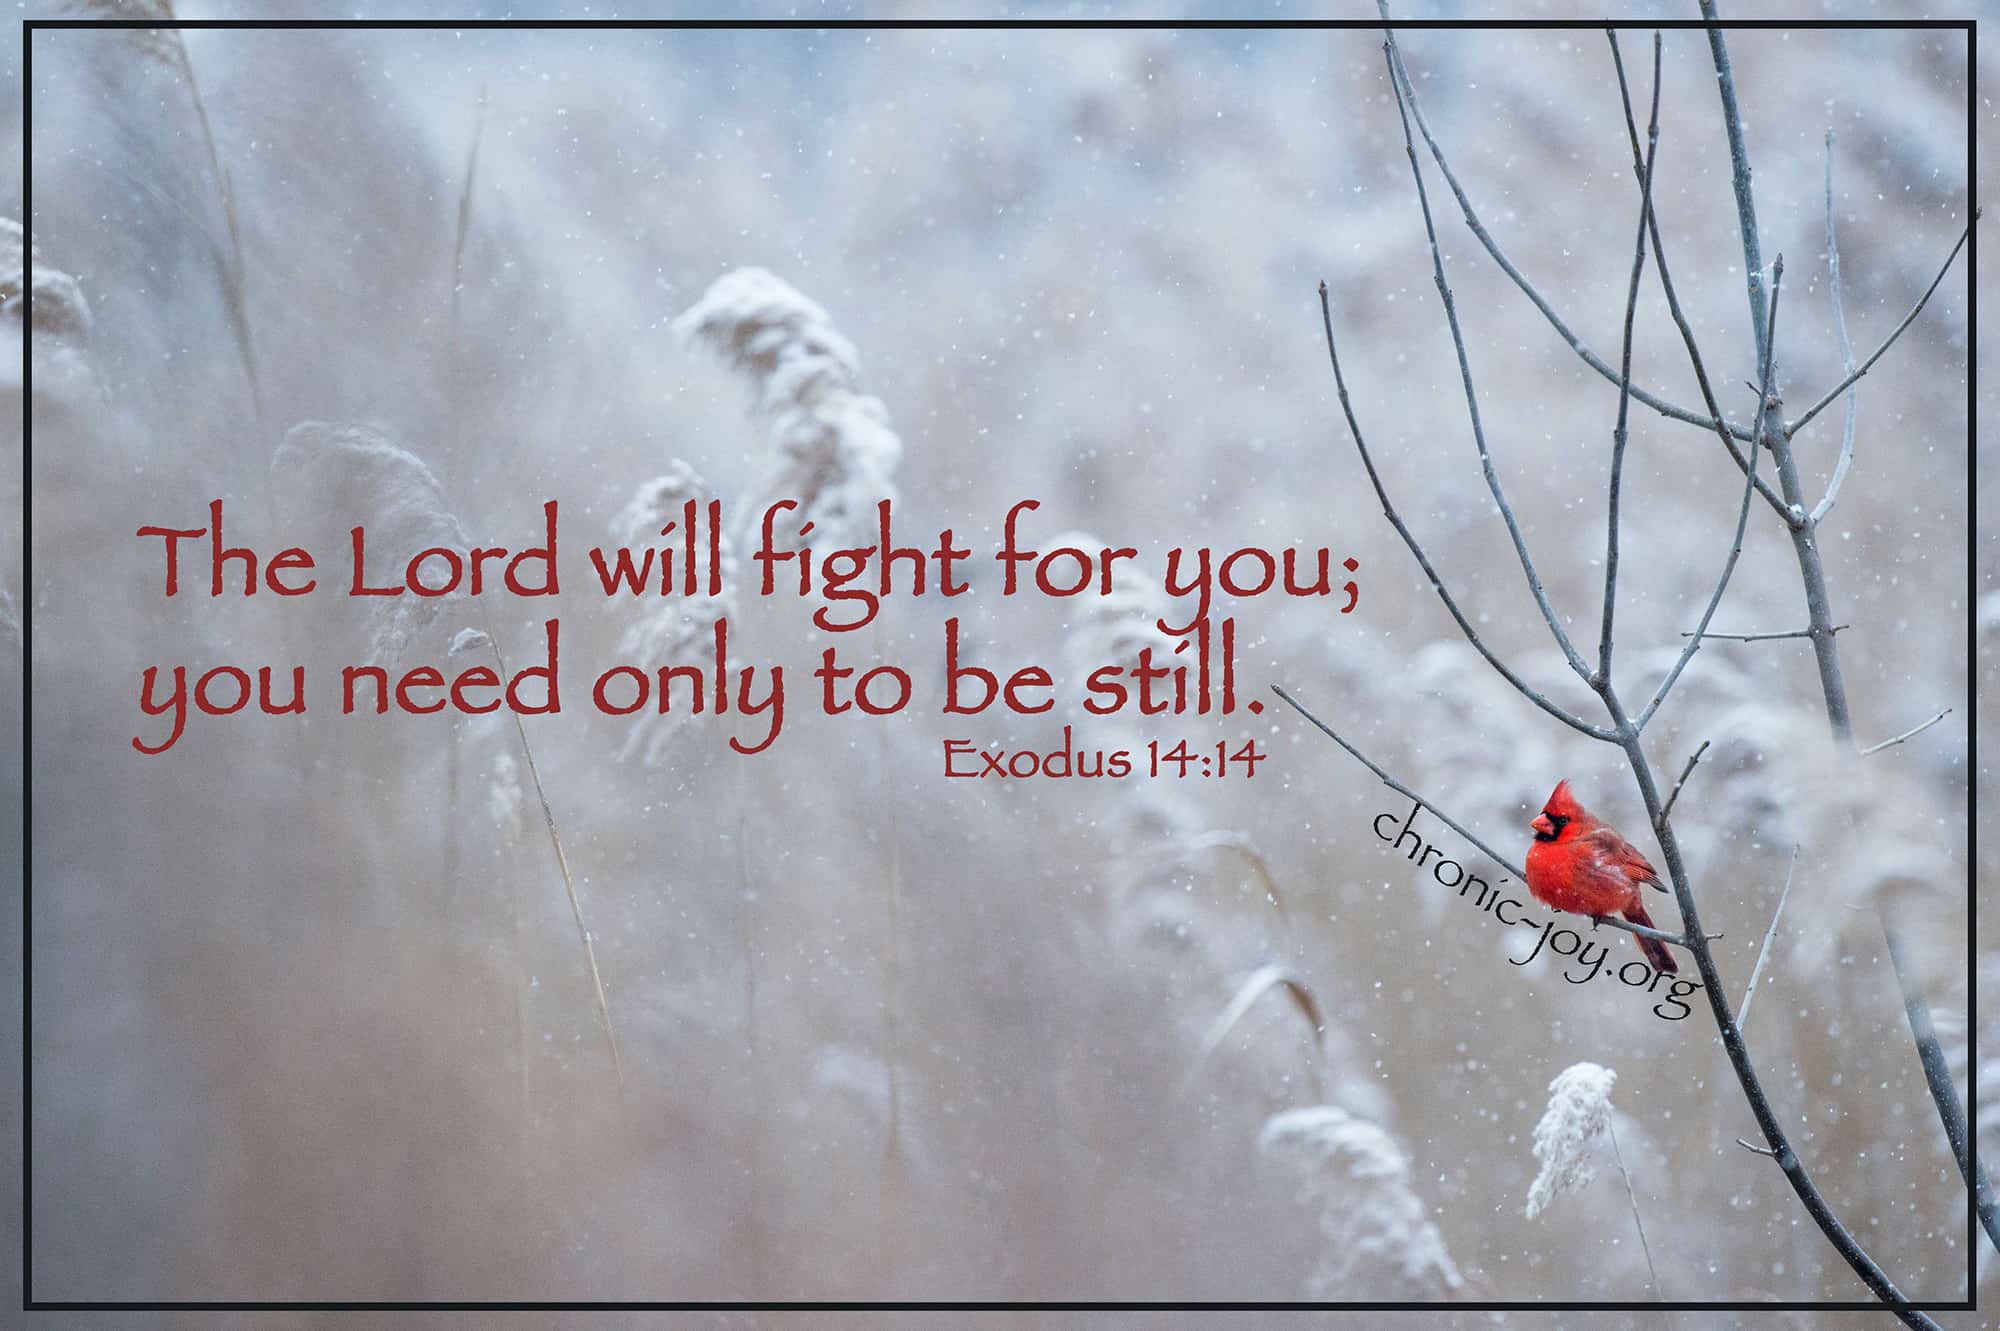 The Lord will fight for you; you only need to be still.